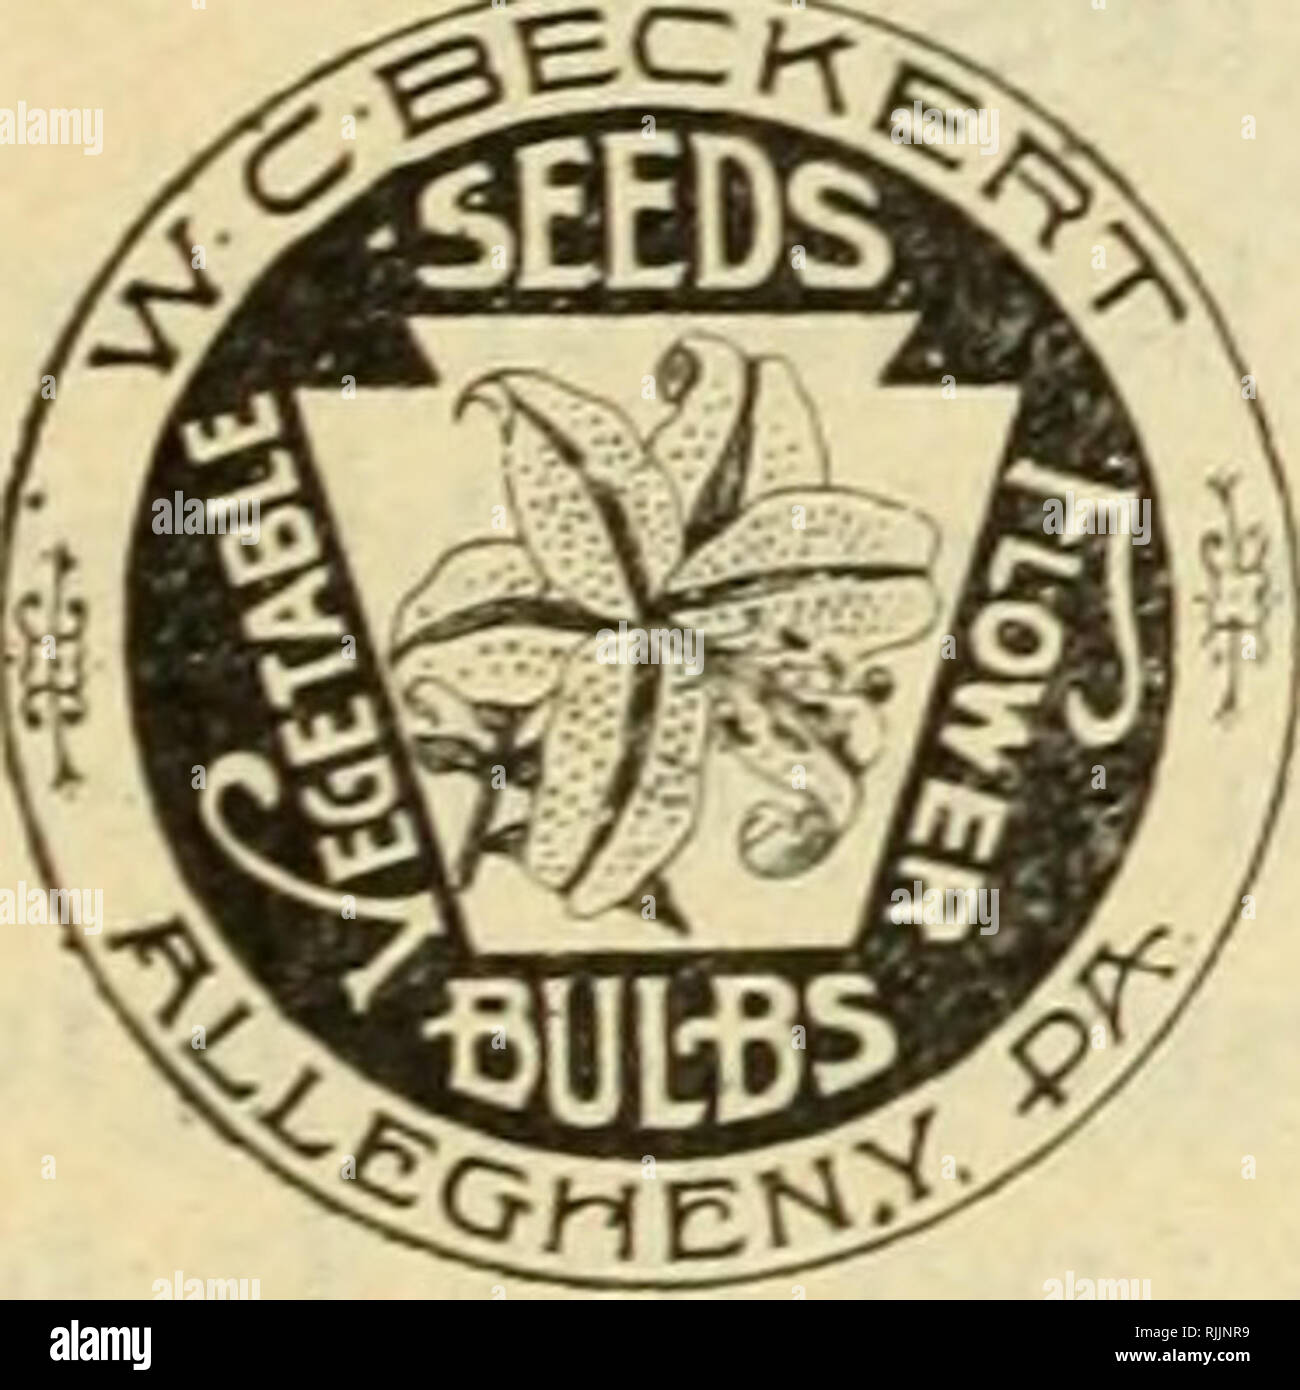 . Beckert's bulbs. Commercial catalogs Seeds; Bulbs (Plants) Seeds Catalogs; Flowers Seeds Catalogs; Garden tools Catalogs. BULBS AND SEEDS FOR AUTUMN, 1896. 9 SINGLE EARLY TULIPS.-CONTINUED. B 9. President Lincoln. Bright lilac violet, extra fine for bedding. 3 for 10 cts.; per doz., 20 cts.; per 100, I1.25. B 12. Proserpine. Very fine glossy carmine pink, large flower. This very striking Tulip is unique in color and forces well, also a fine bedder. 5 cts. each; per doz., 35 cts.; per 100, I2.50. B 9. Rachel Ruiscli. White shaded pink, fine for forcing and bedding. 3 for 10 cts.; per doz., 25 Stock Photo